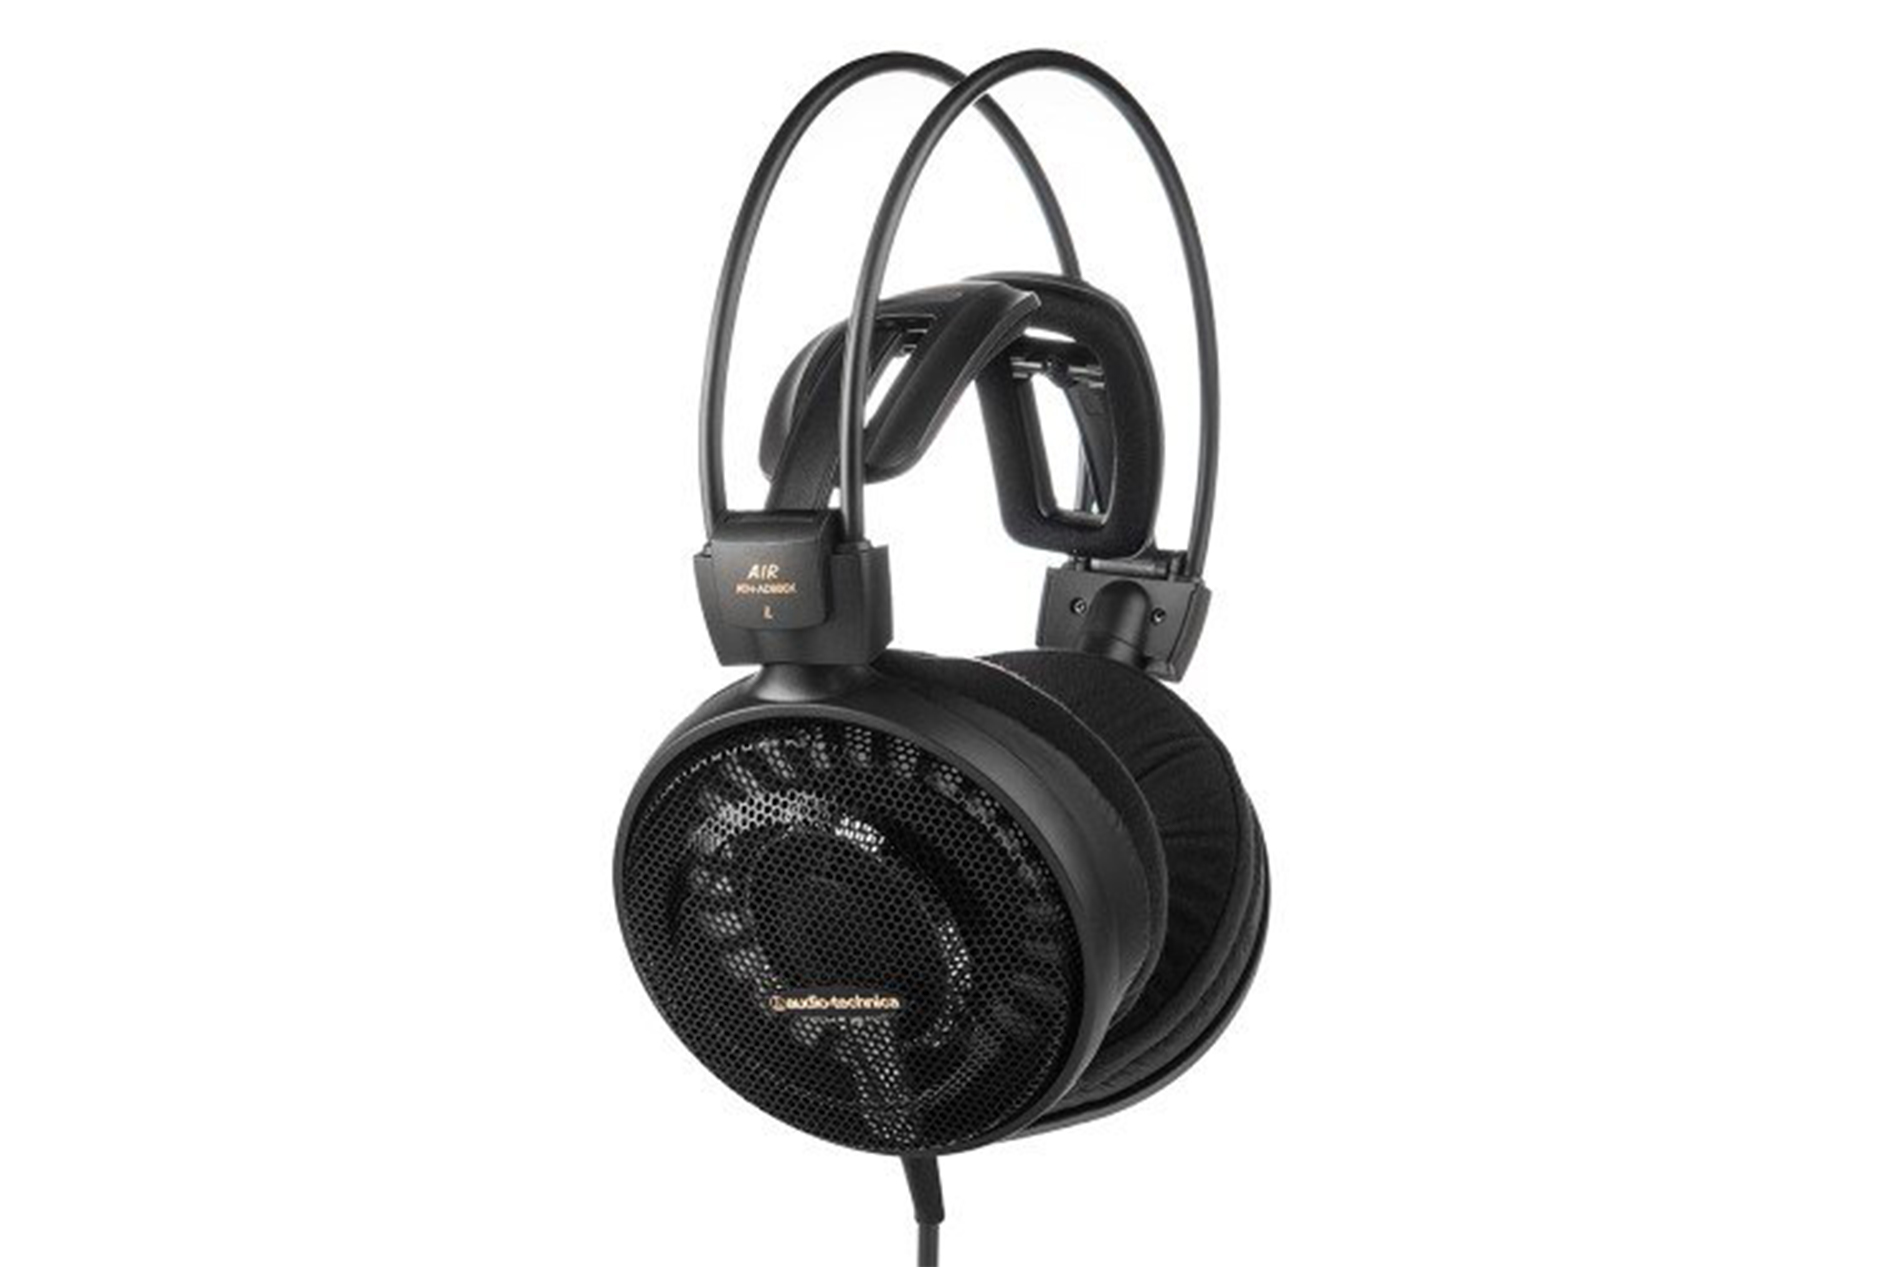 Audio-Technica ATH-AD900x headphones angled away from the camera against a white background.